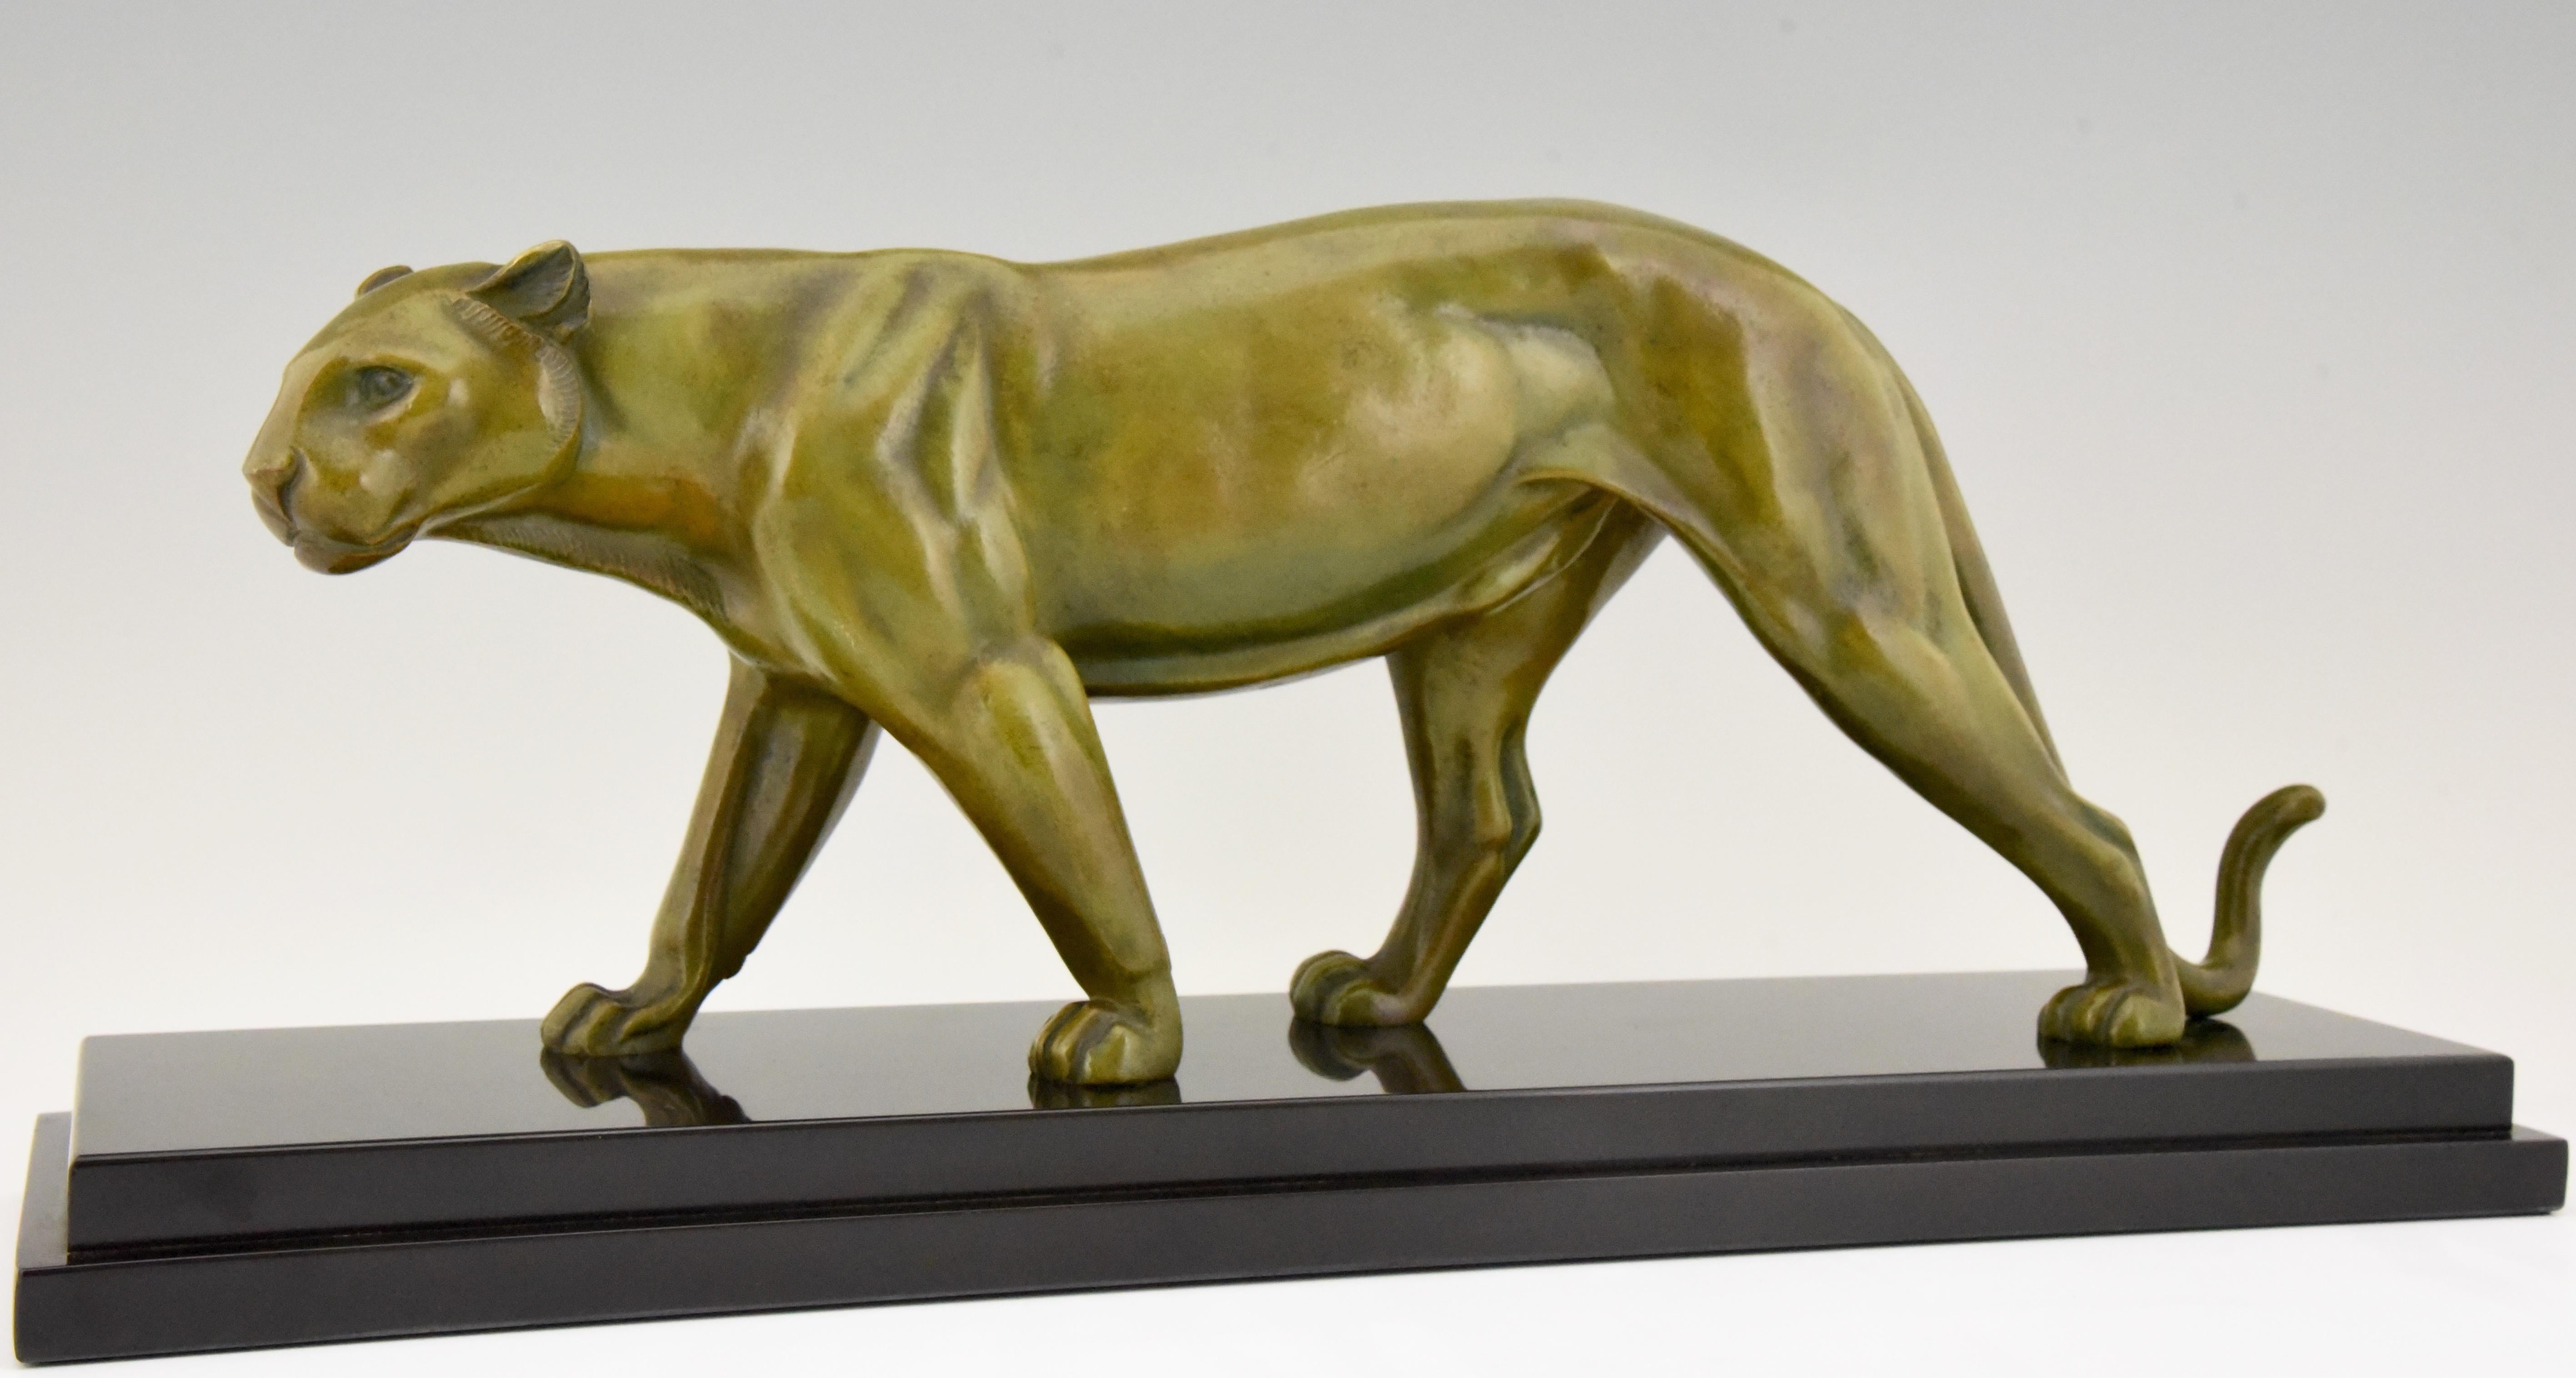 Beautiful Art Deco bronze panther sculpture signed by the French artsist M. Leducq with lovely patina. The sculpture stands on a Belgian Black marble base. France 1930. 
Literature:
Animals in bronze by Christopher Payne. Antique collectors